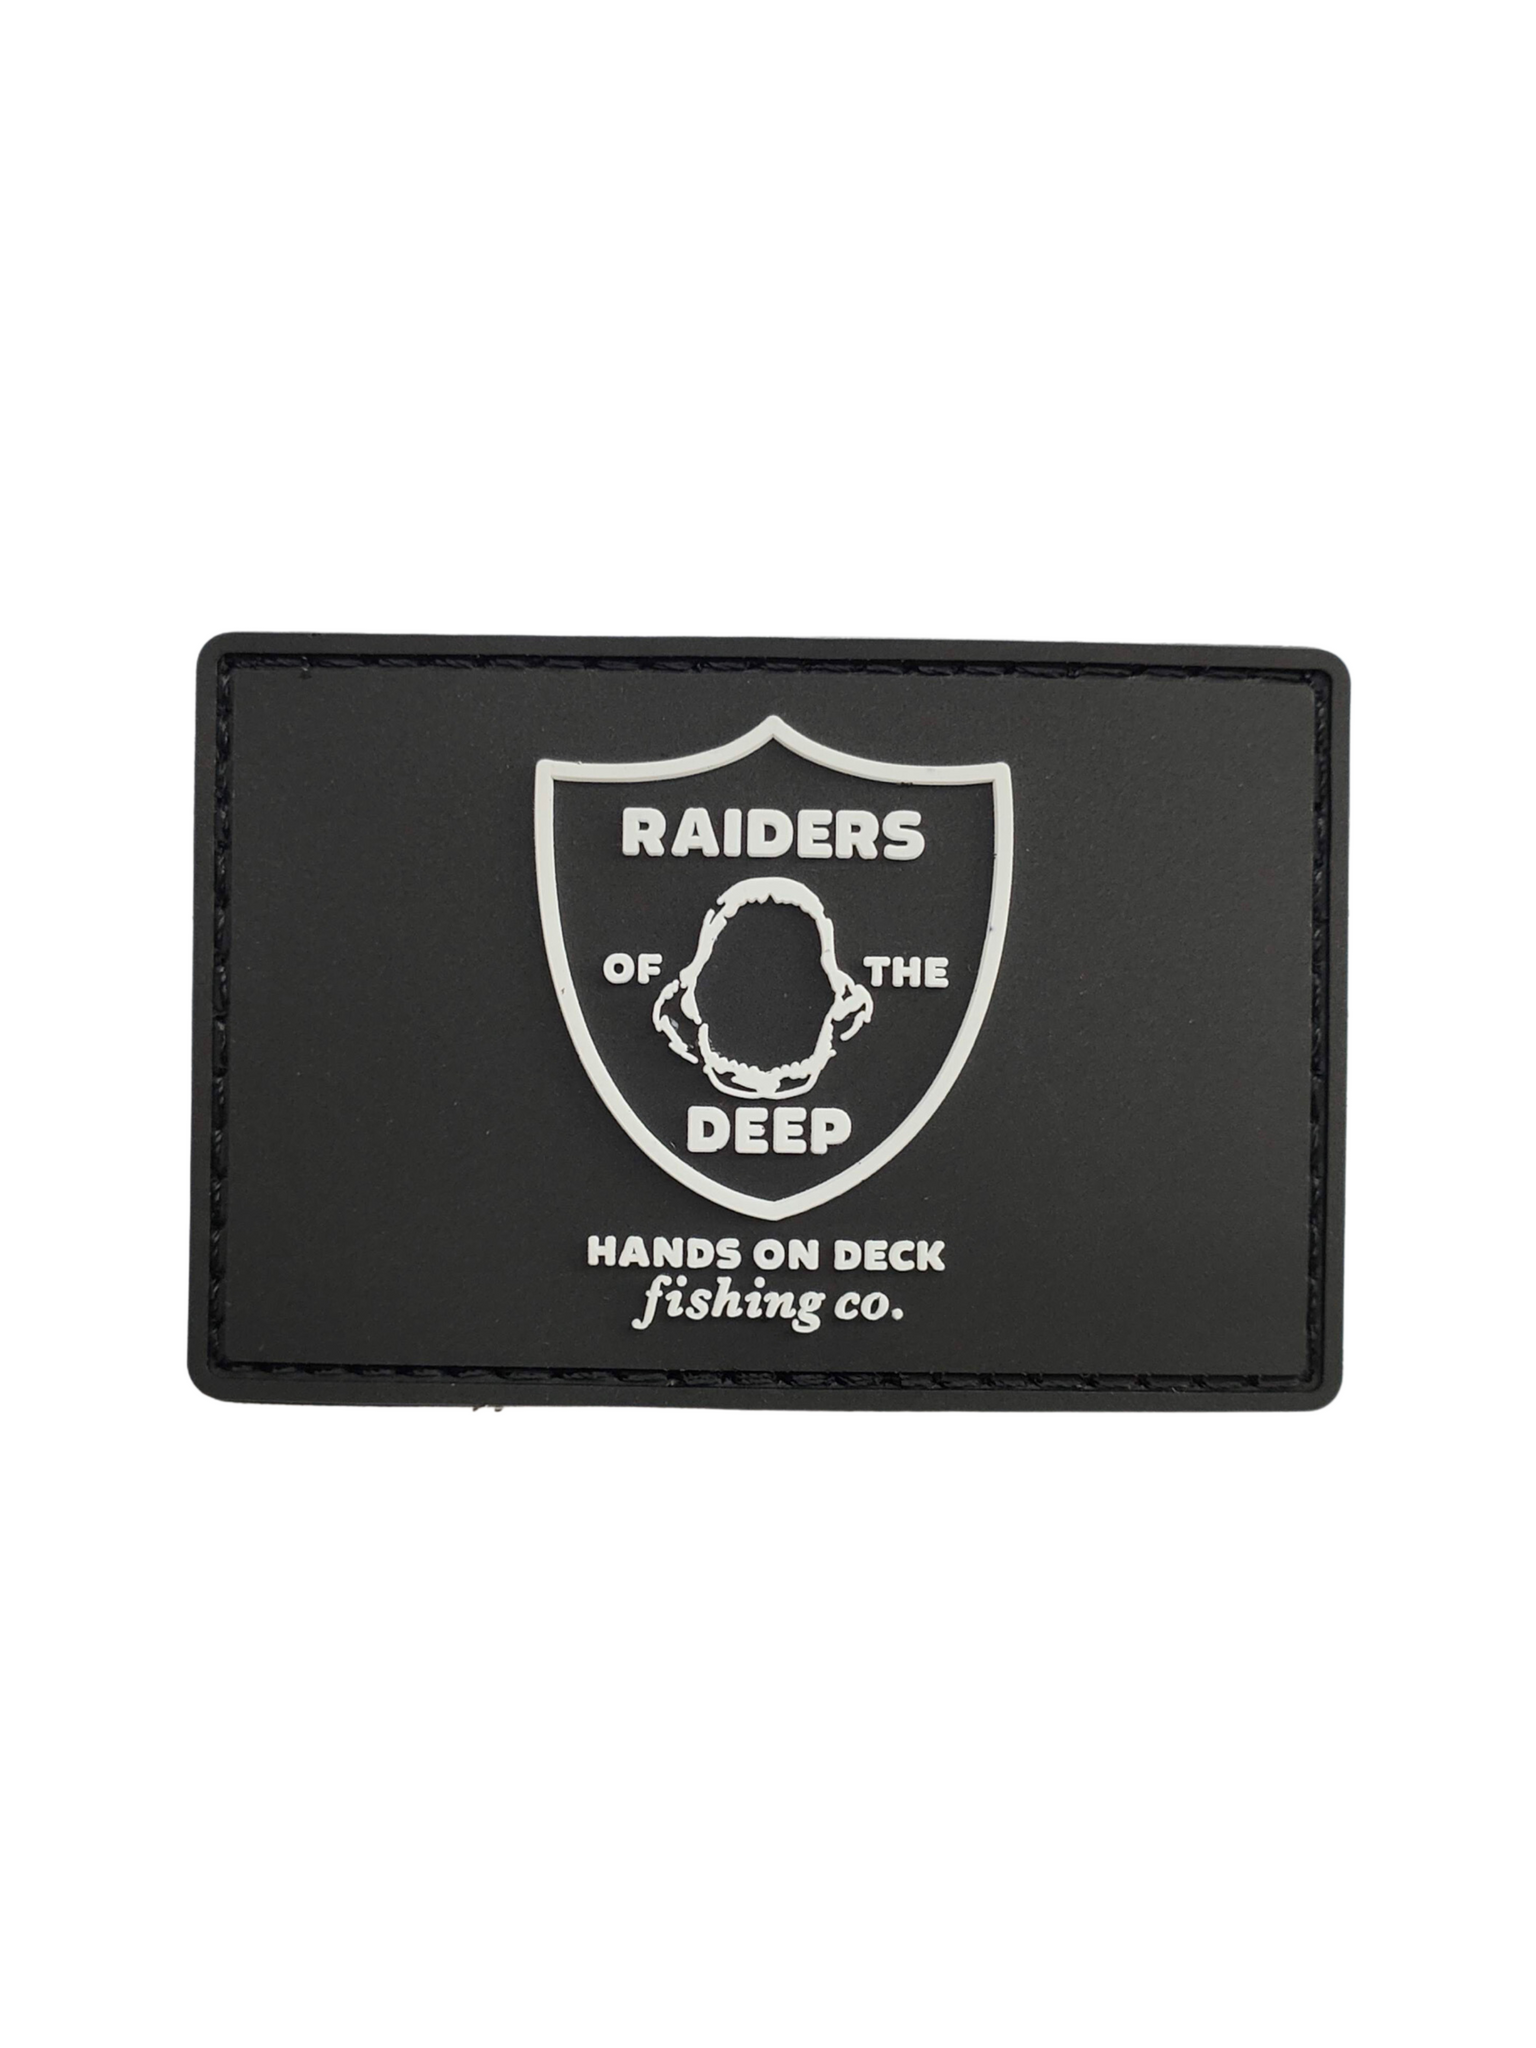 Raiders of the Deep Velcro Patch